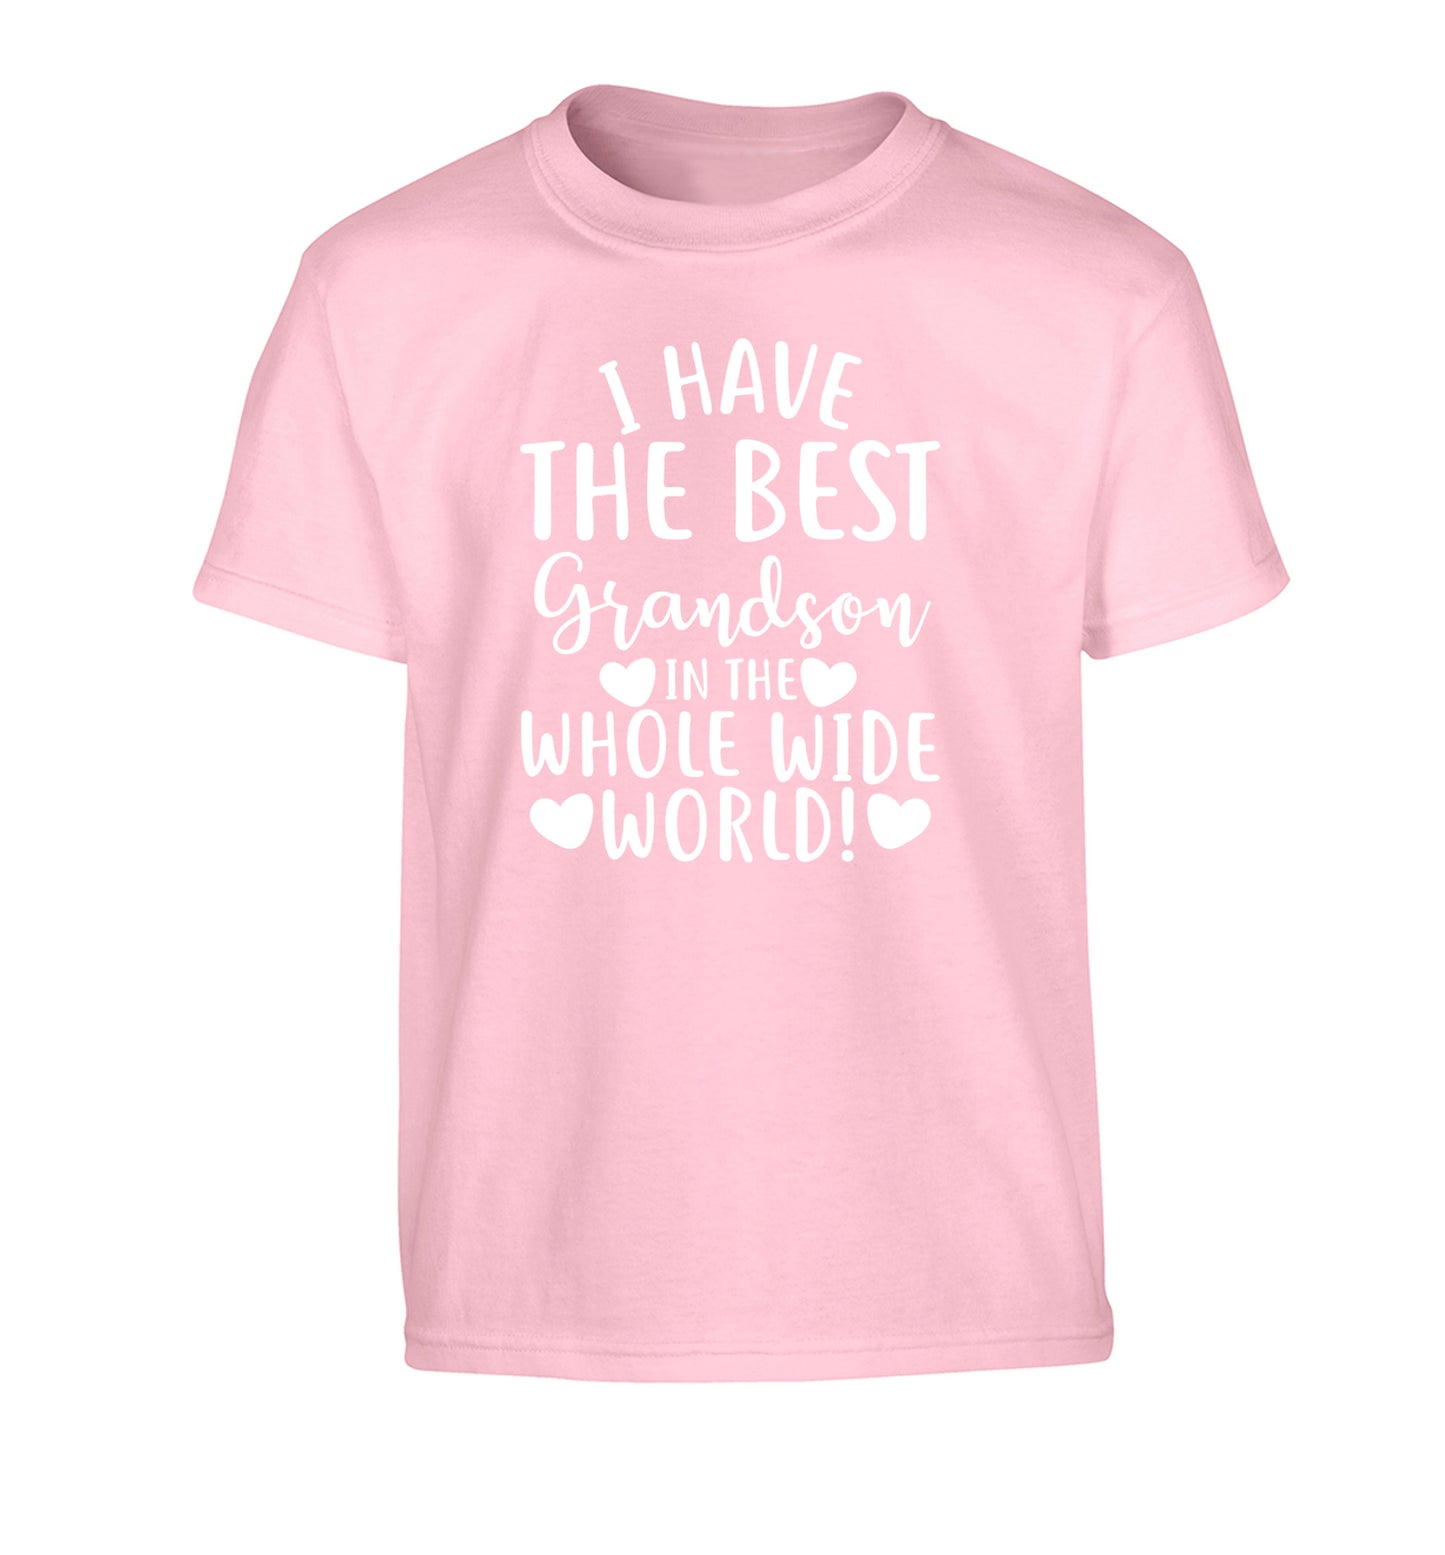 I have the best grandson in the whole wide world! Children's light pink Tshirt 12-13 Years